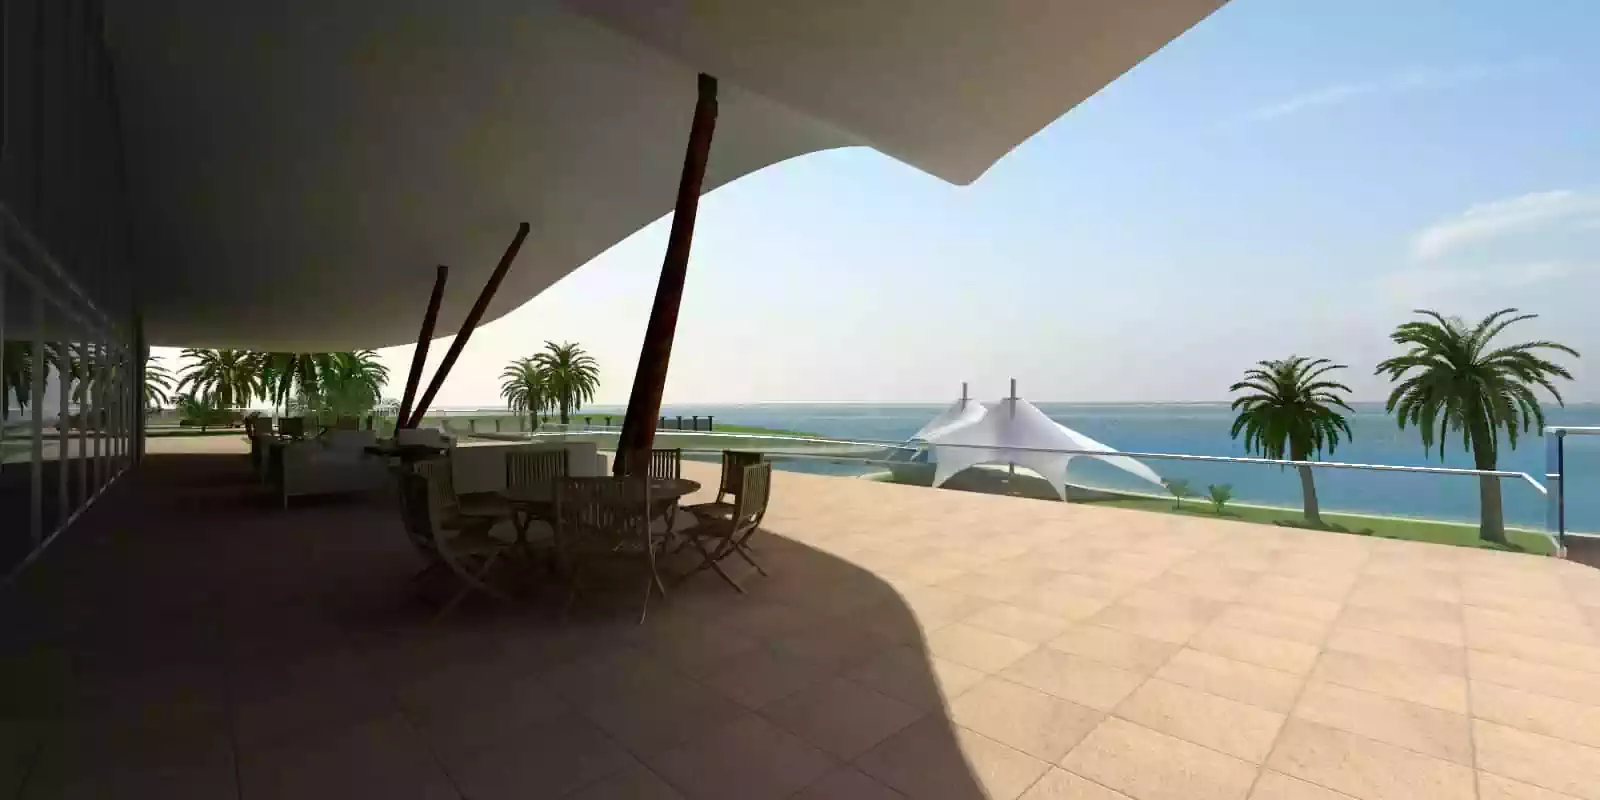 Enormous veranda overlooking the ocean in luxurious beach mansion in Dubai. design by Pantic Architects